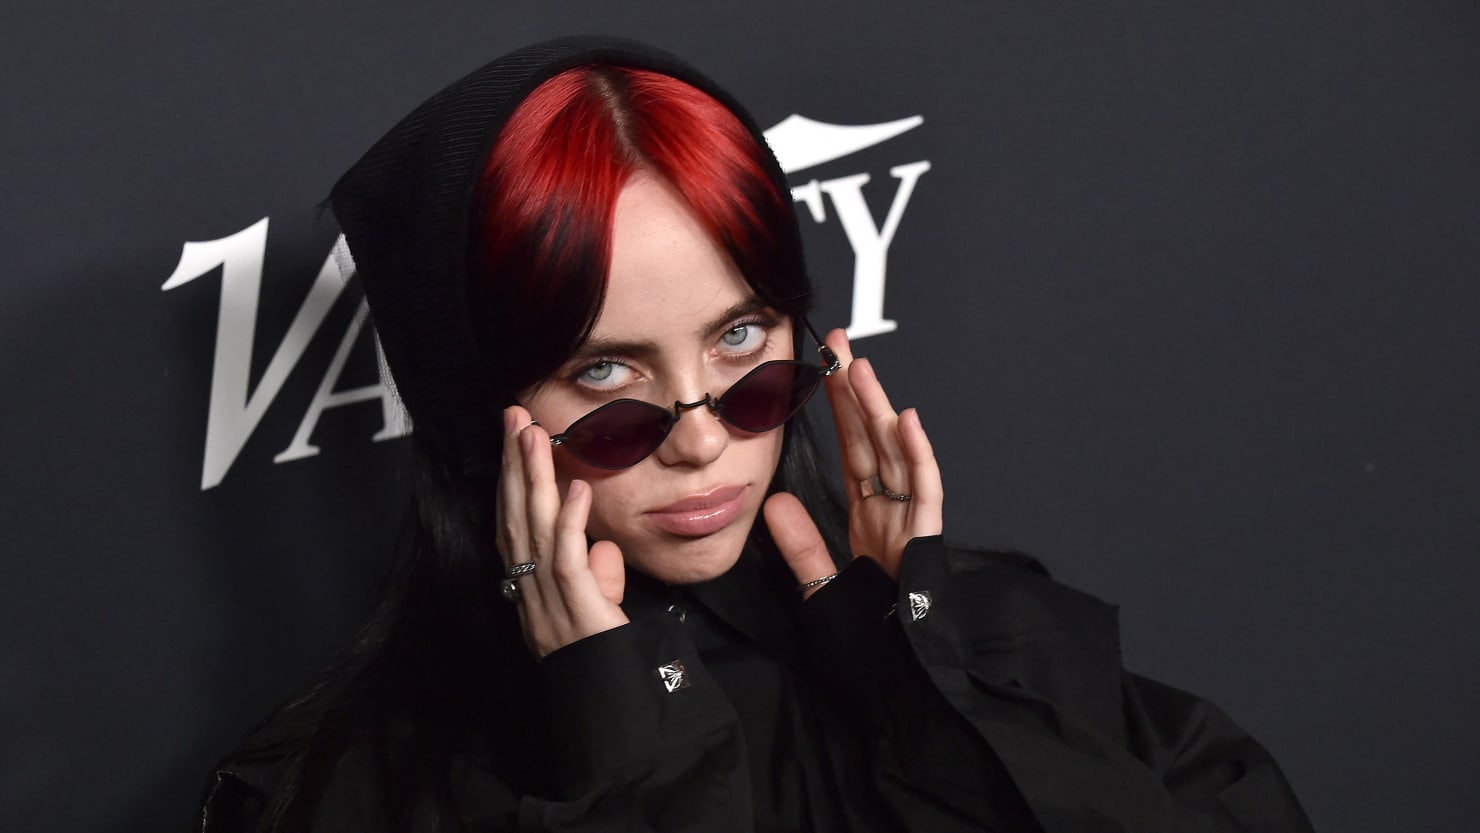 Billie Eilish Confirms She Came Out as LGBTQ+ in Variety Cover Story